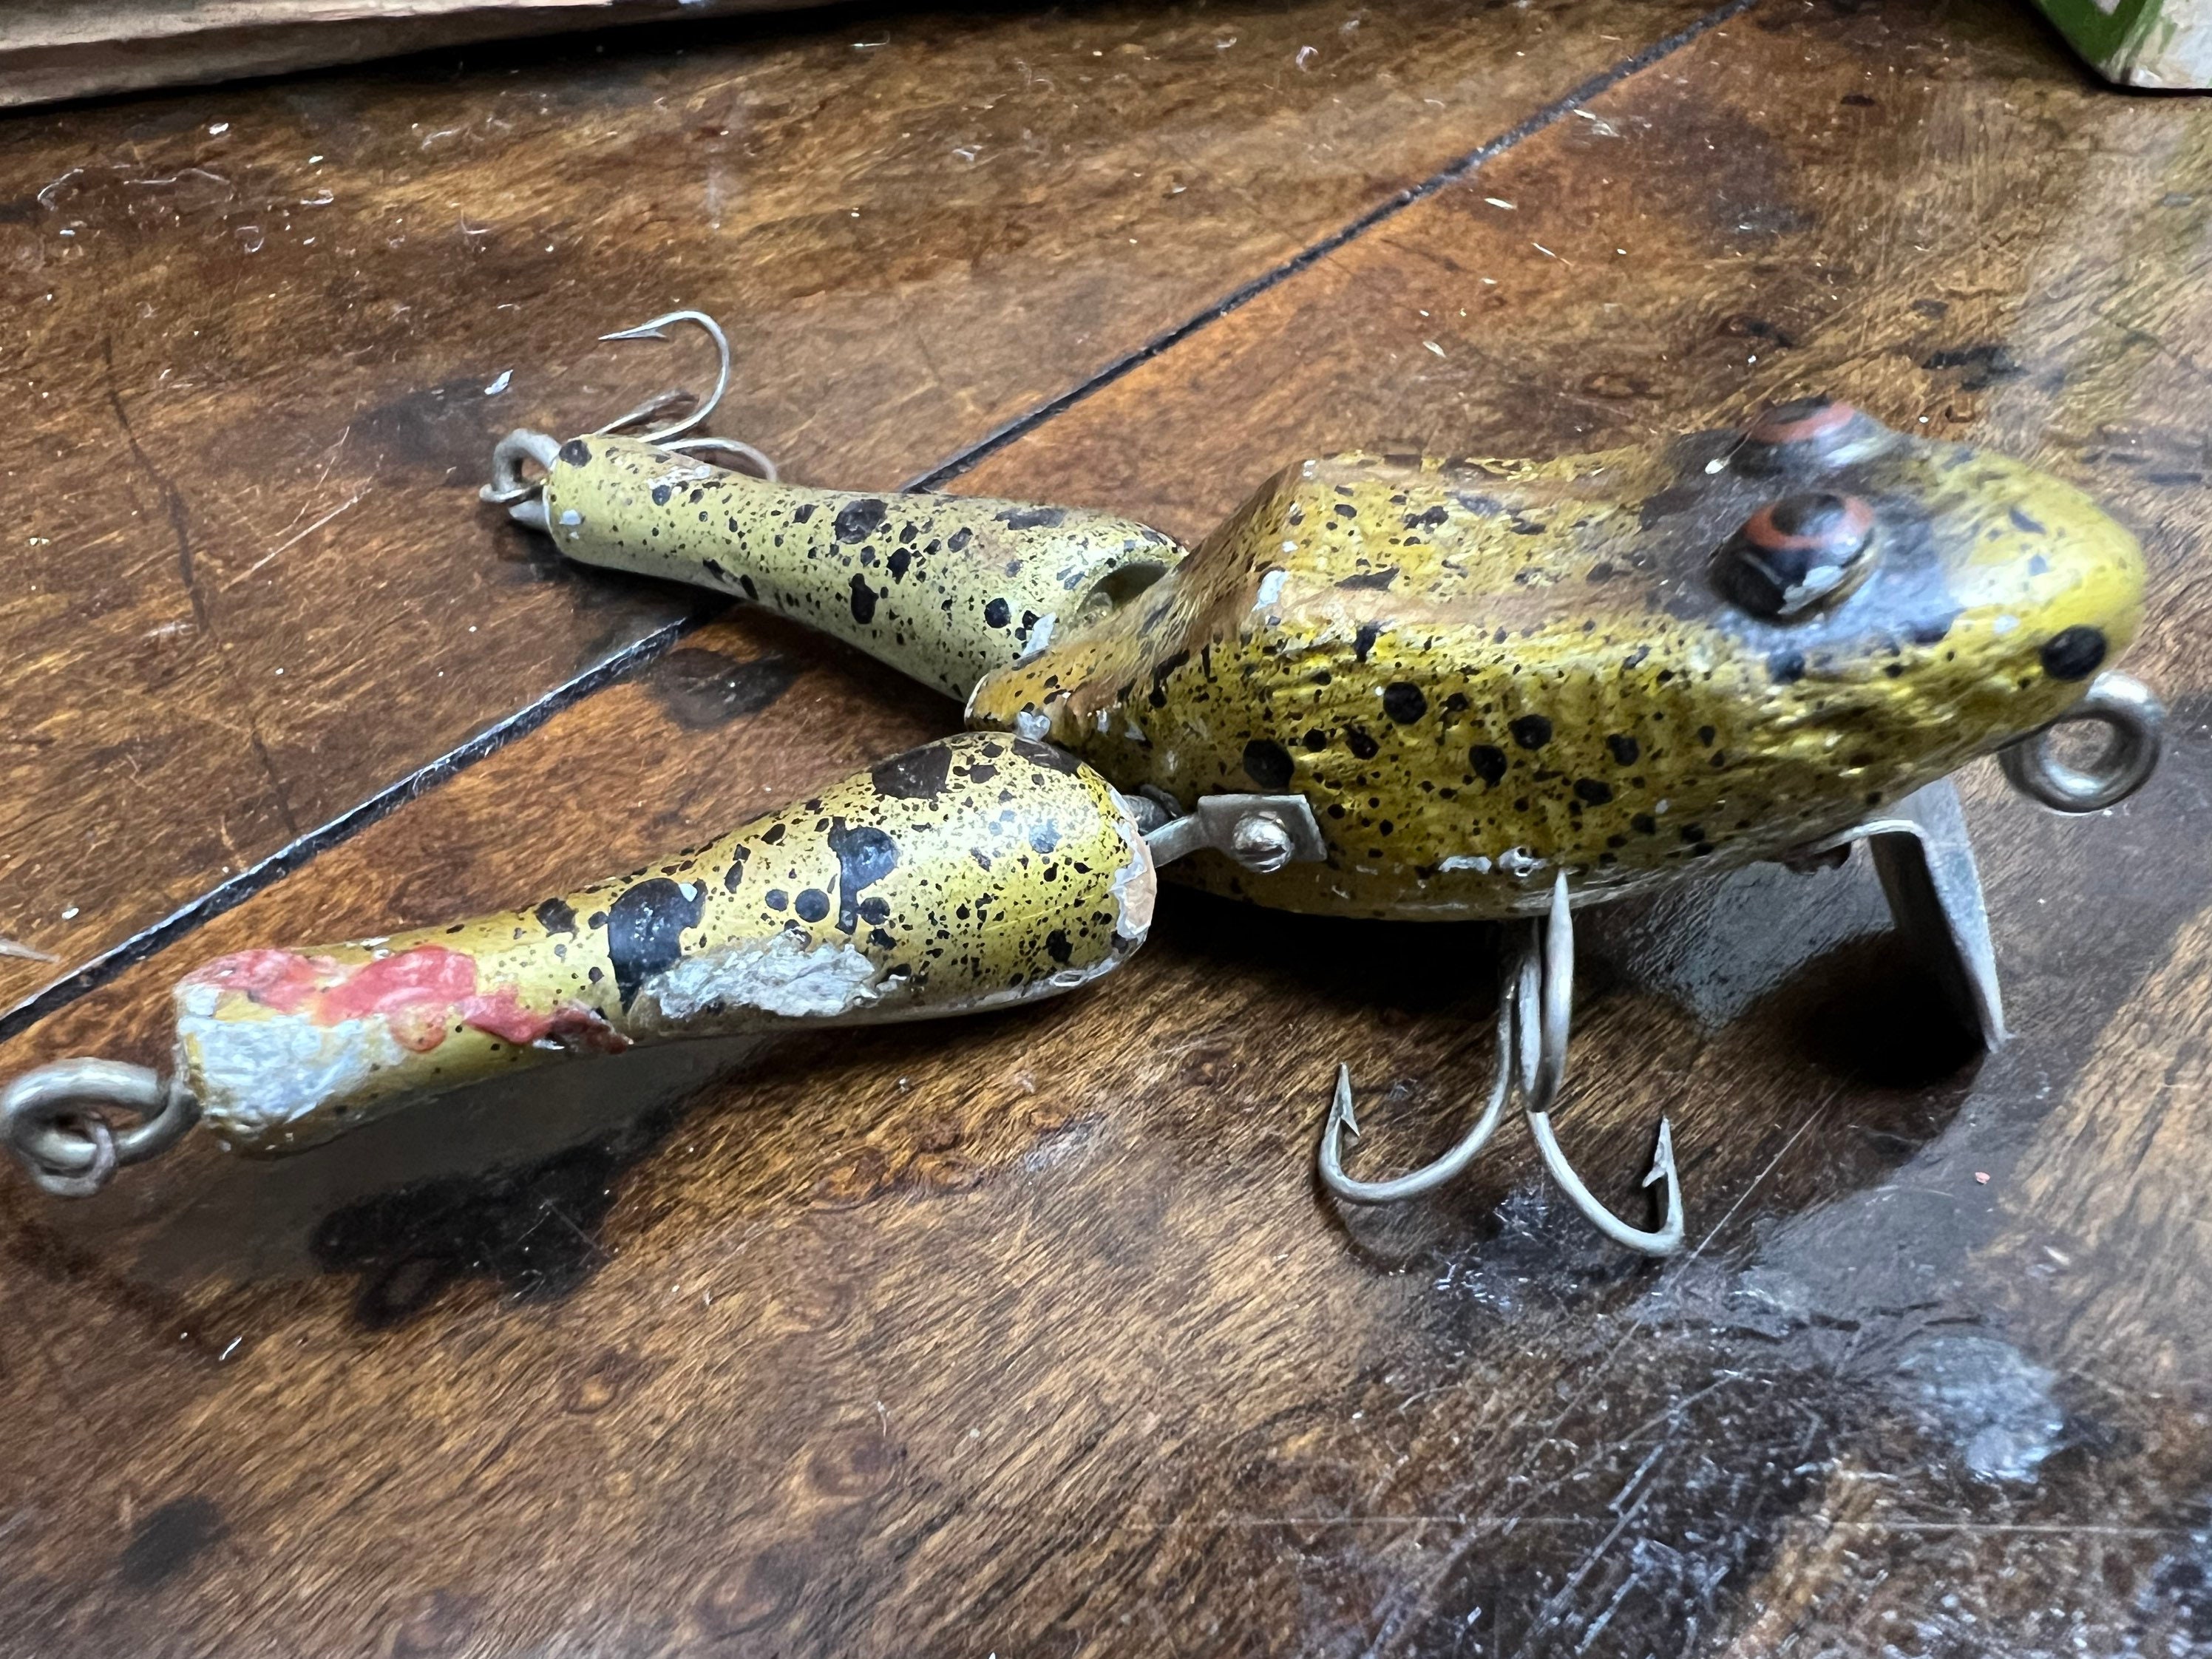  Fishing Lure Frog Victorian Antique Graphic: Stainless